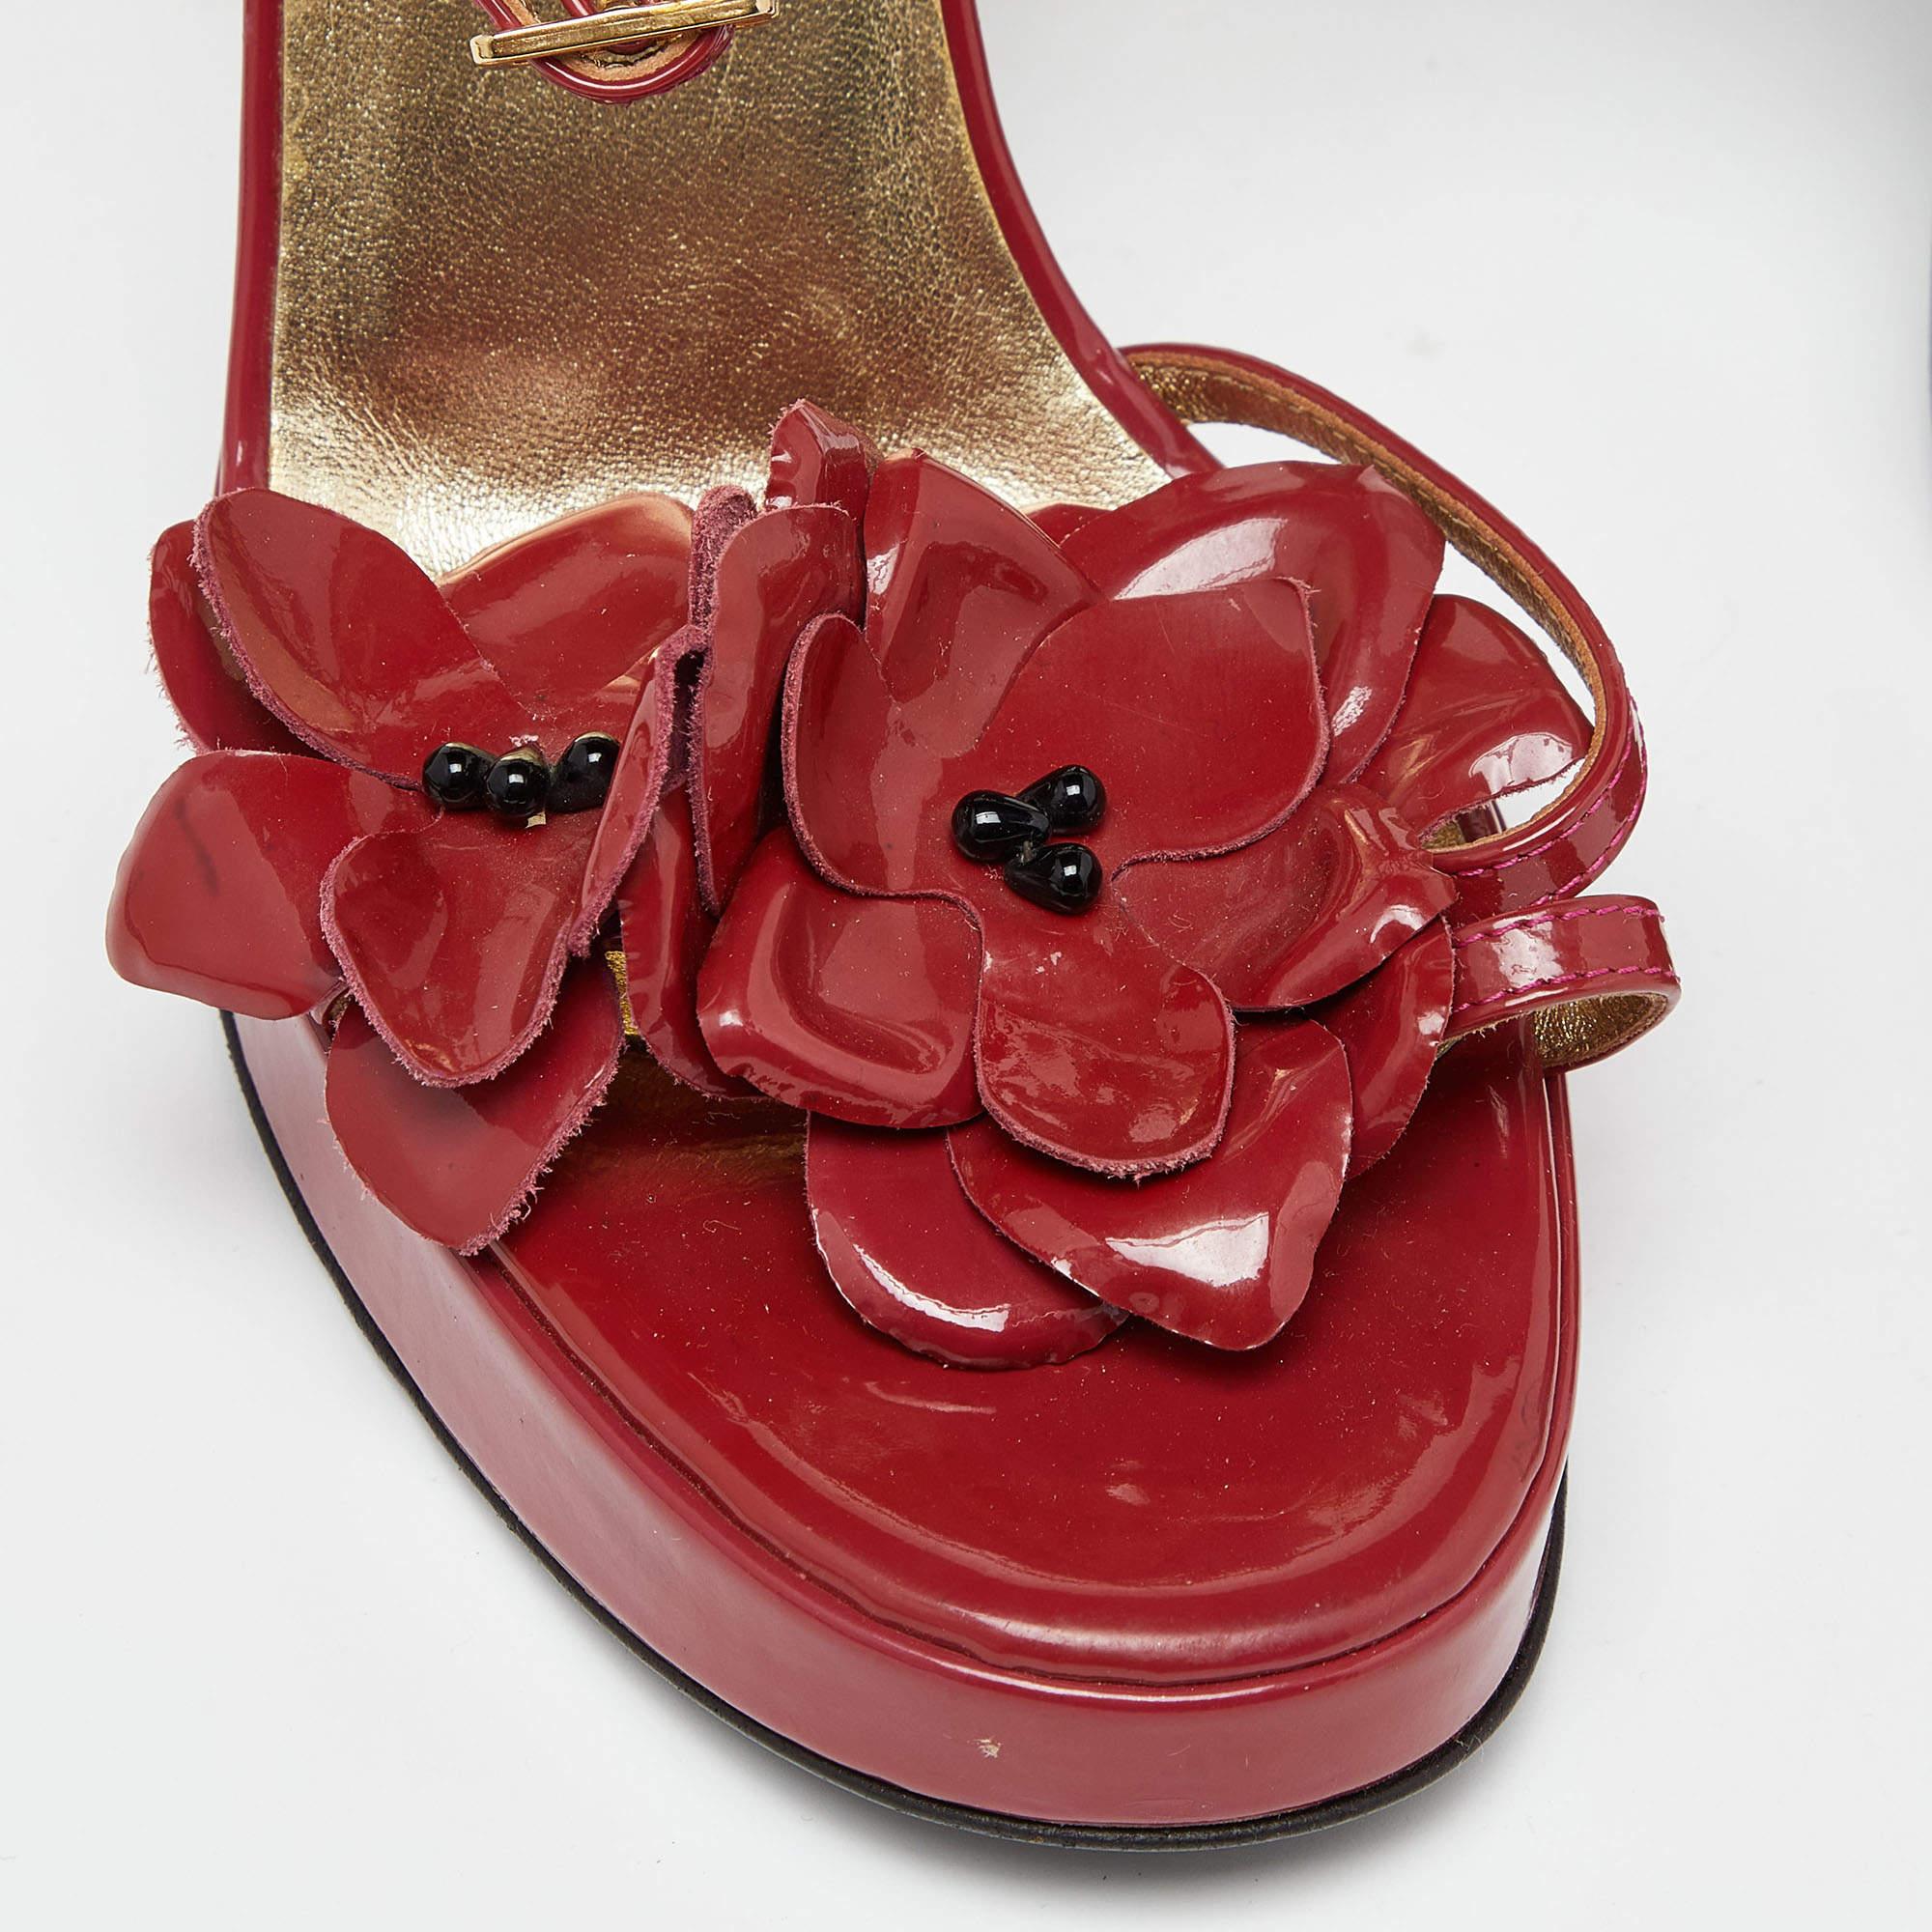 Dolce & Gabbana Red Patent Leather Flower Strappy Sandals Size 38 For Sale 2